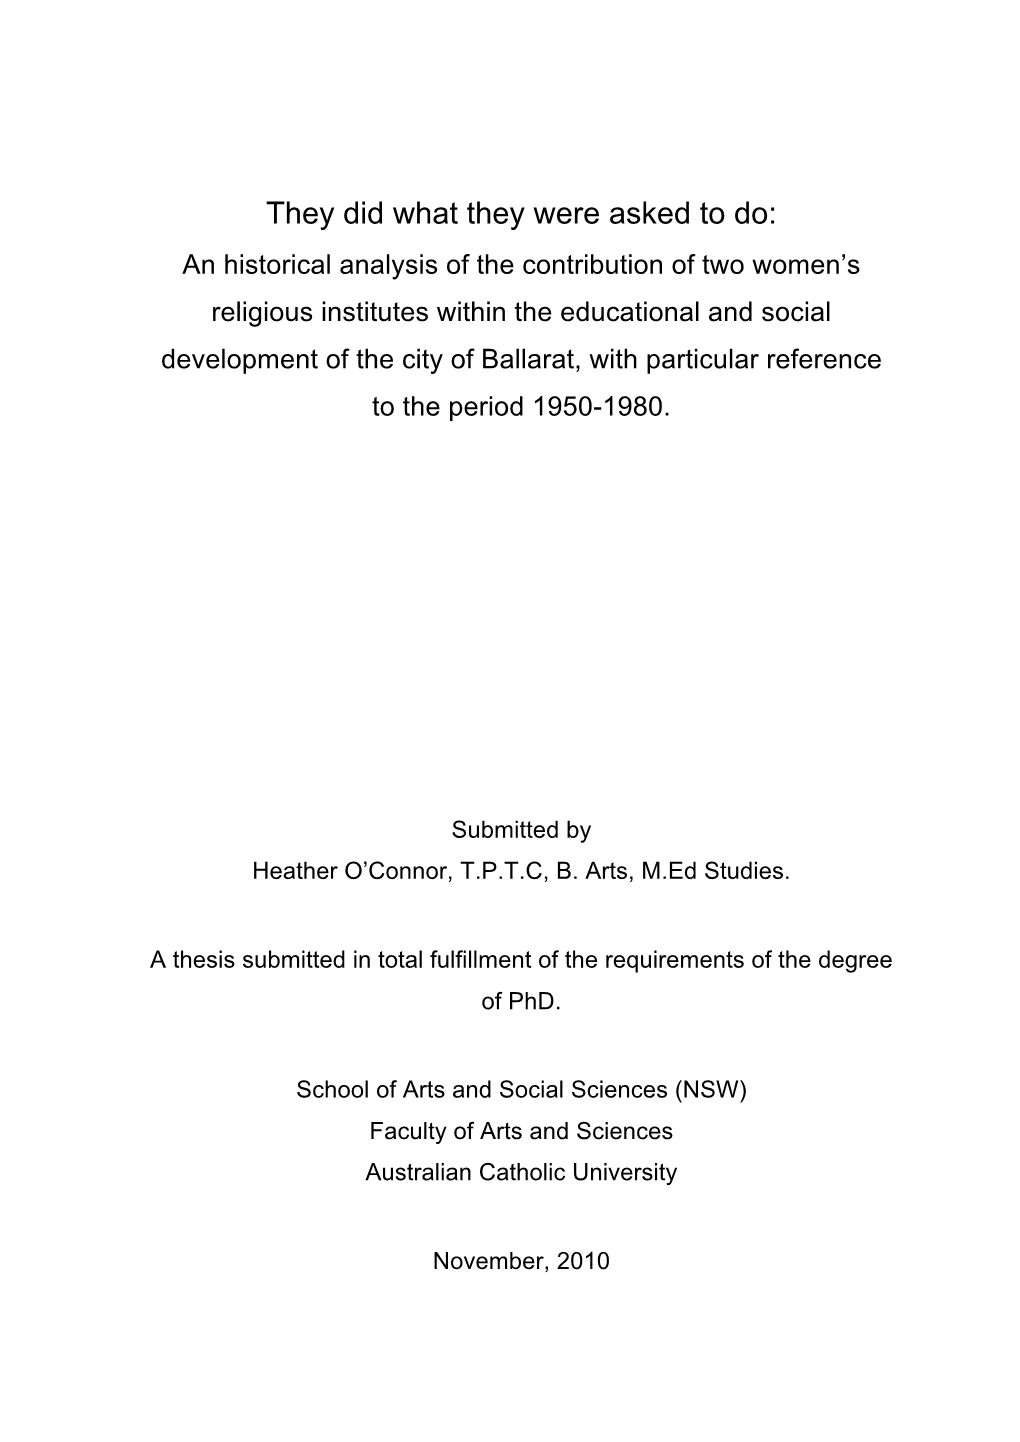 An Historical Analysis of the Contribution of Two Women's